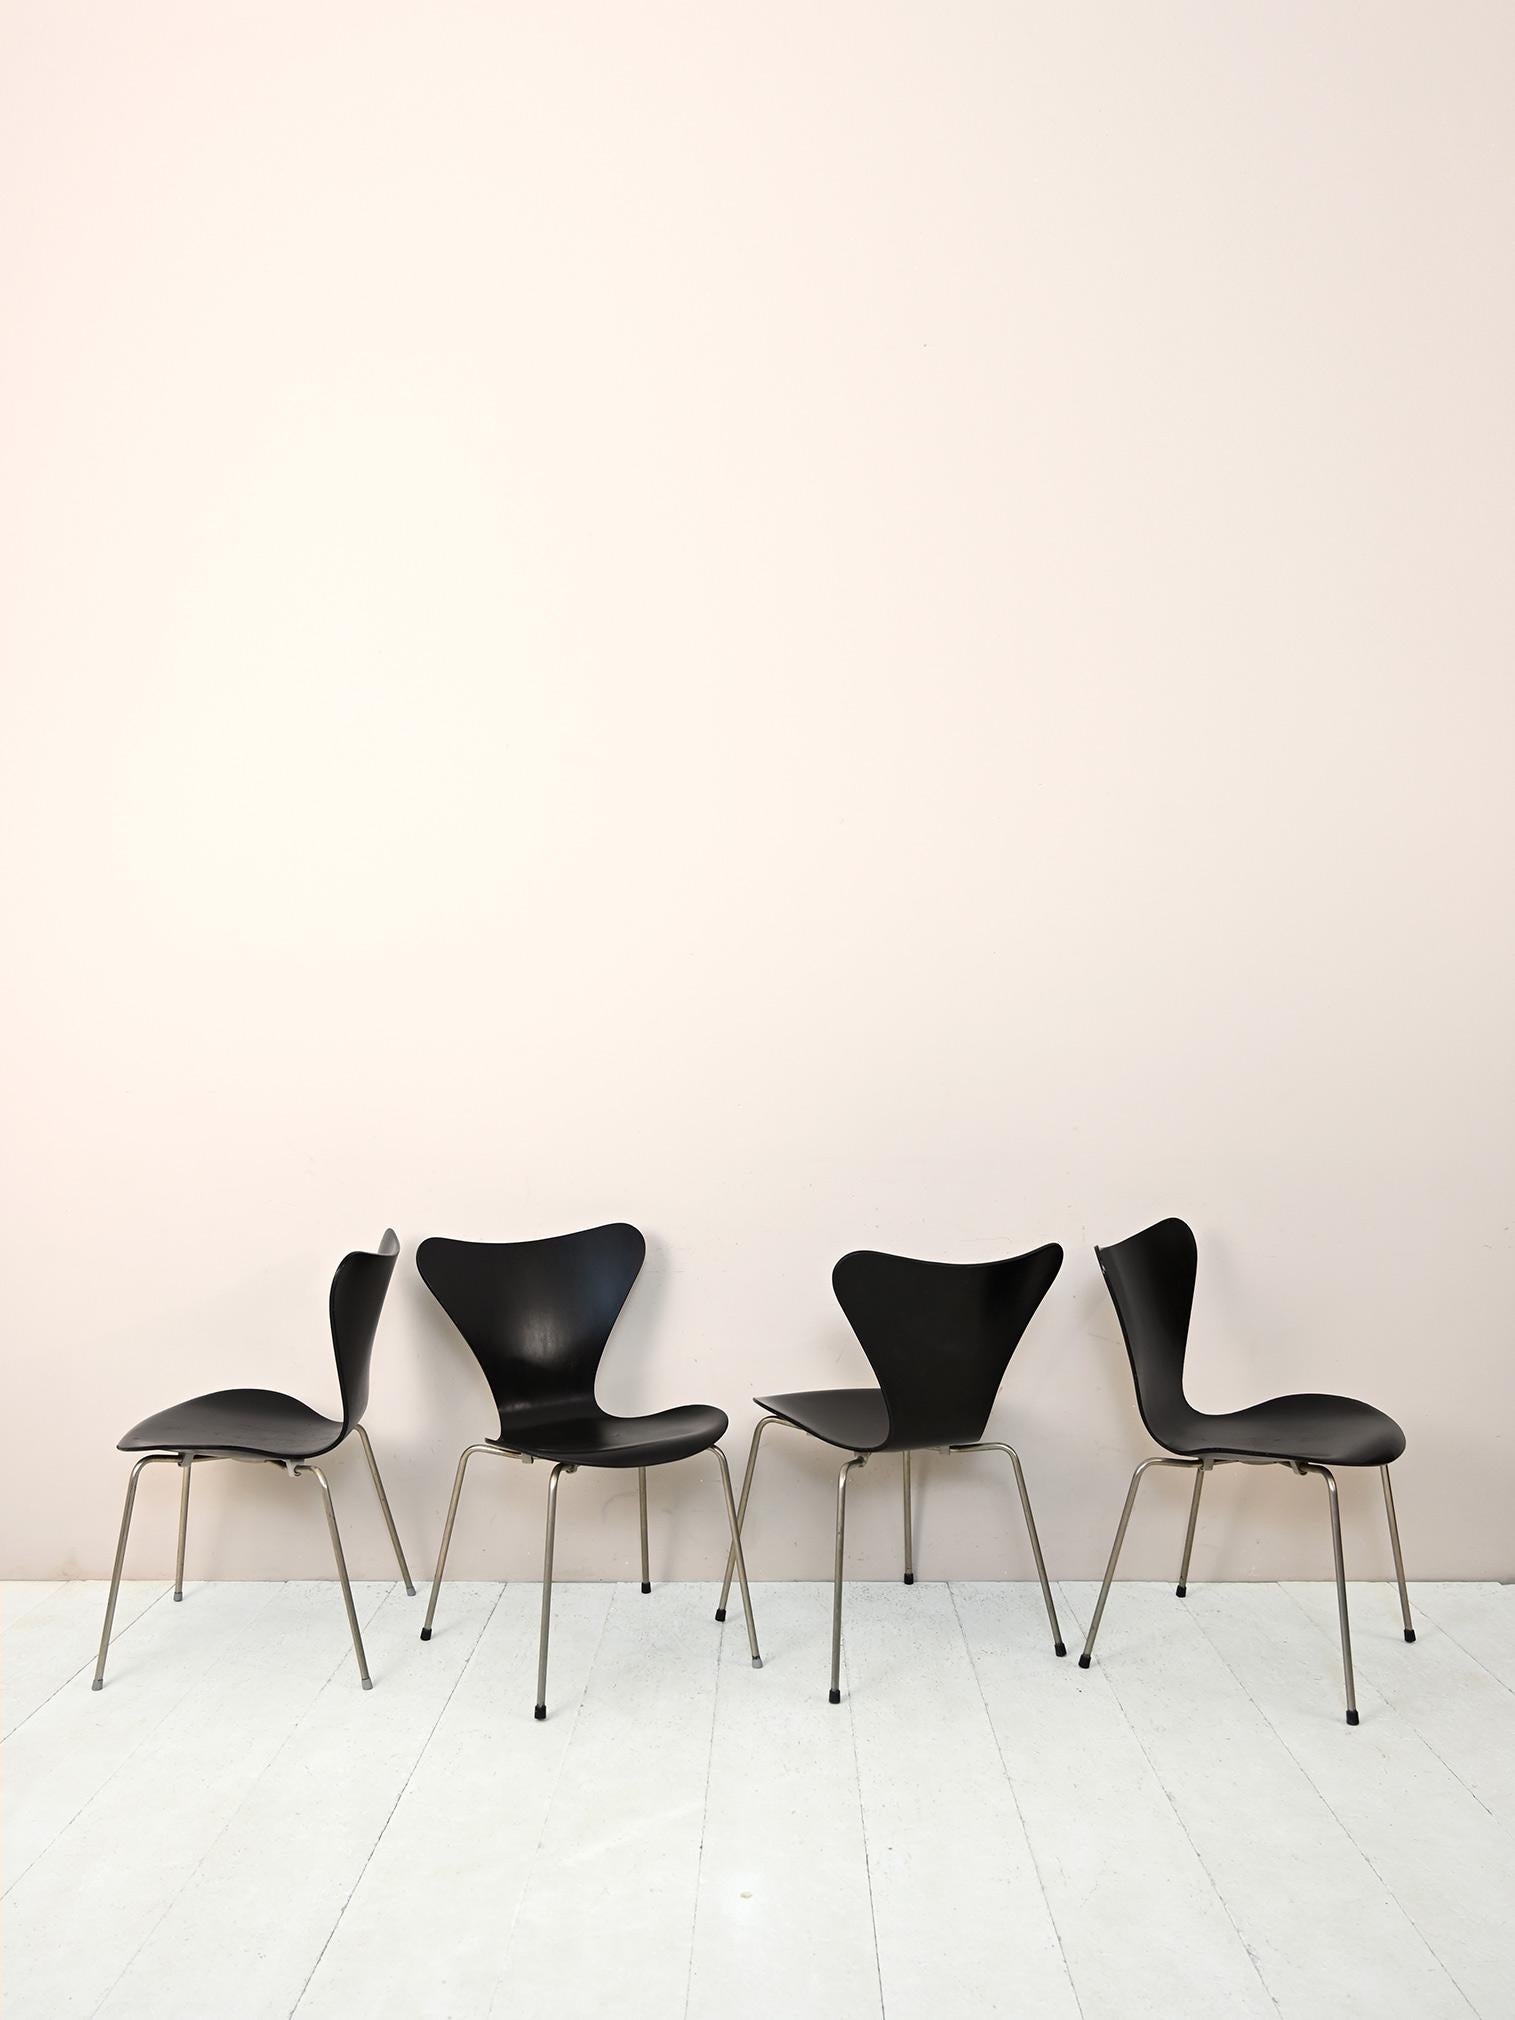 4 iconic chairs by designer Arne Jacobsen.

Known as the Series 7 chair, the 3107 chair is part of design legend, a timeless and historic chair. Jacobsen, inspired by the work of Charles Eames, developed a lightweight, stackable chair consisting